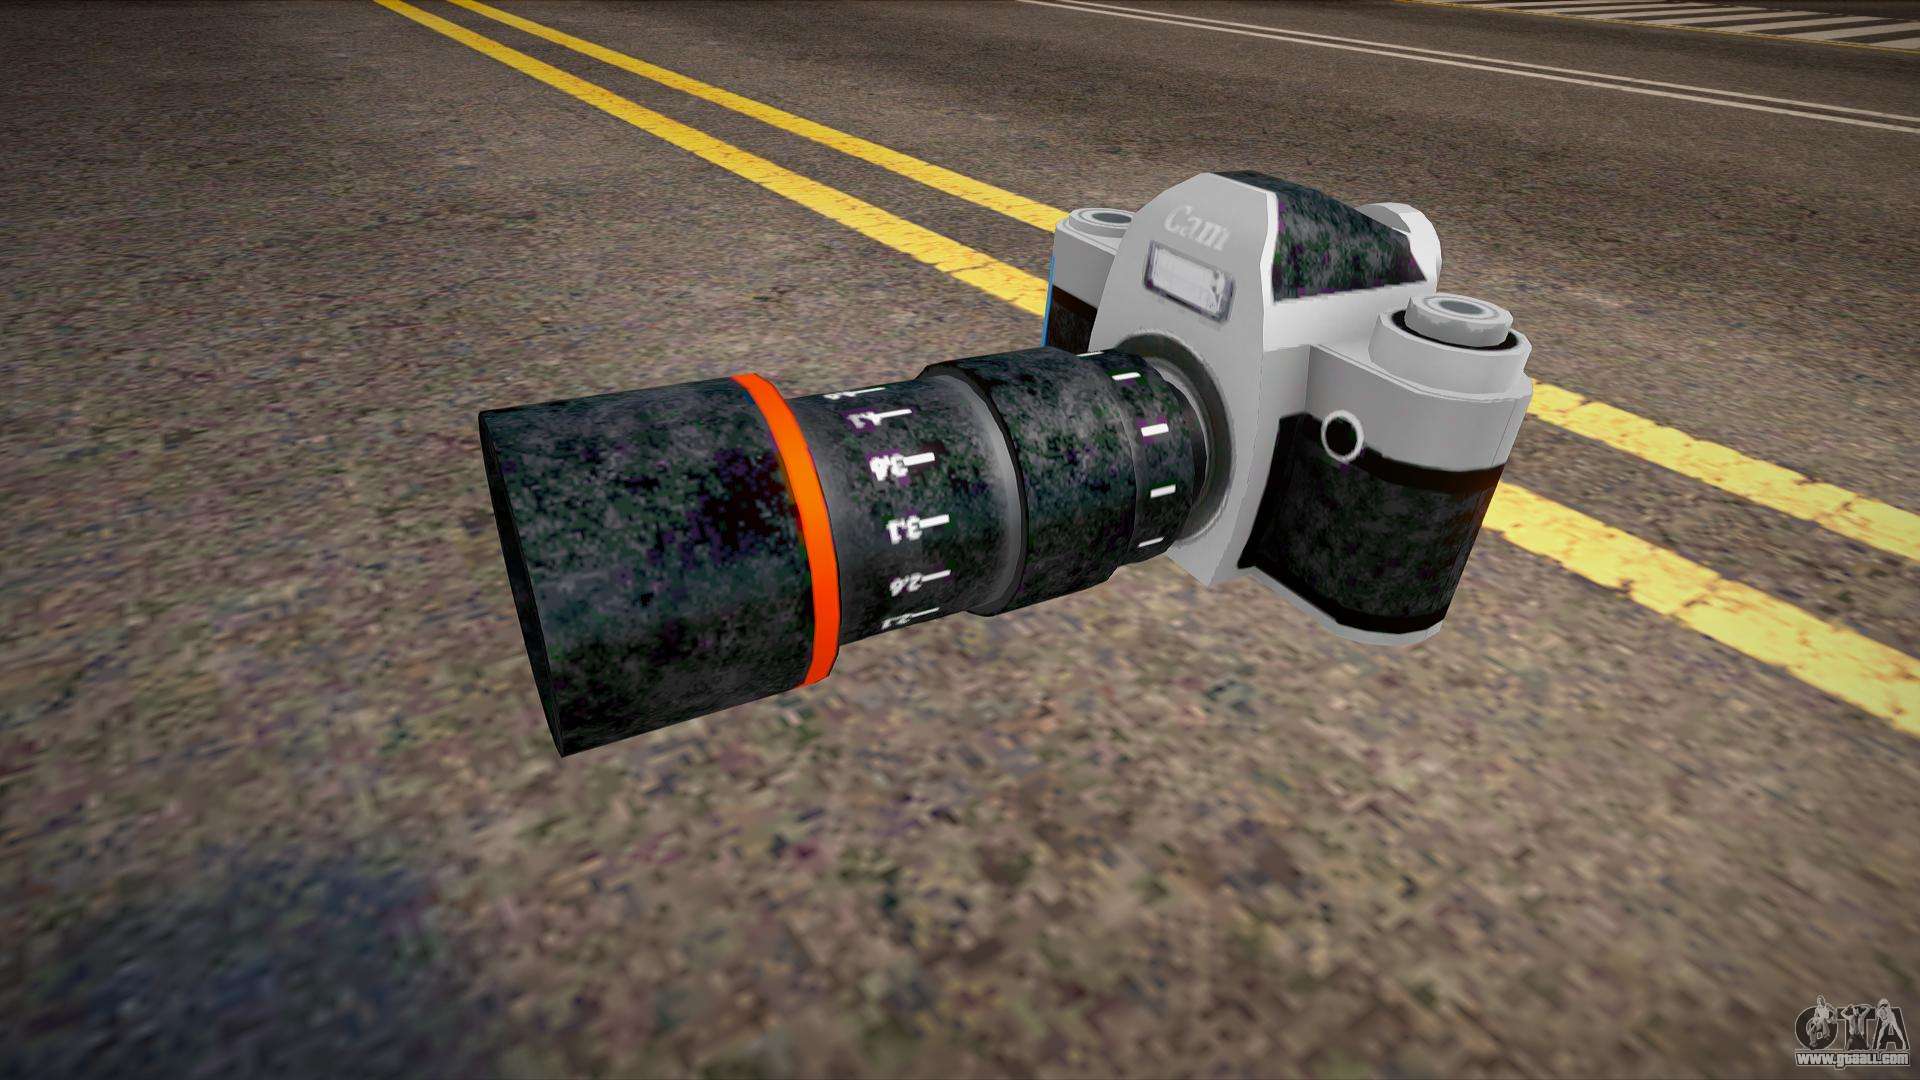 Download Camera without lens for GTA San Andreas